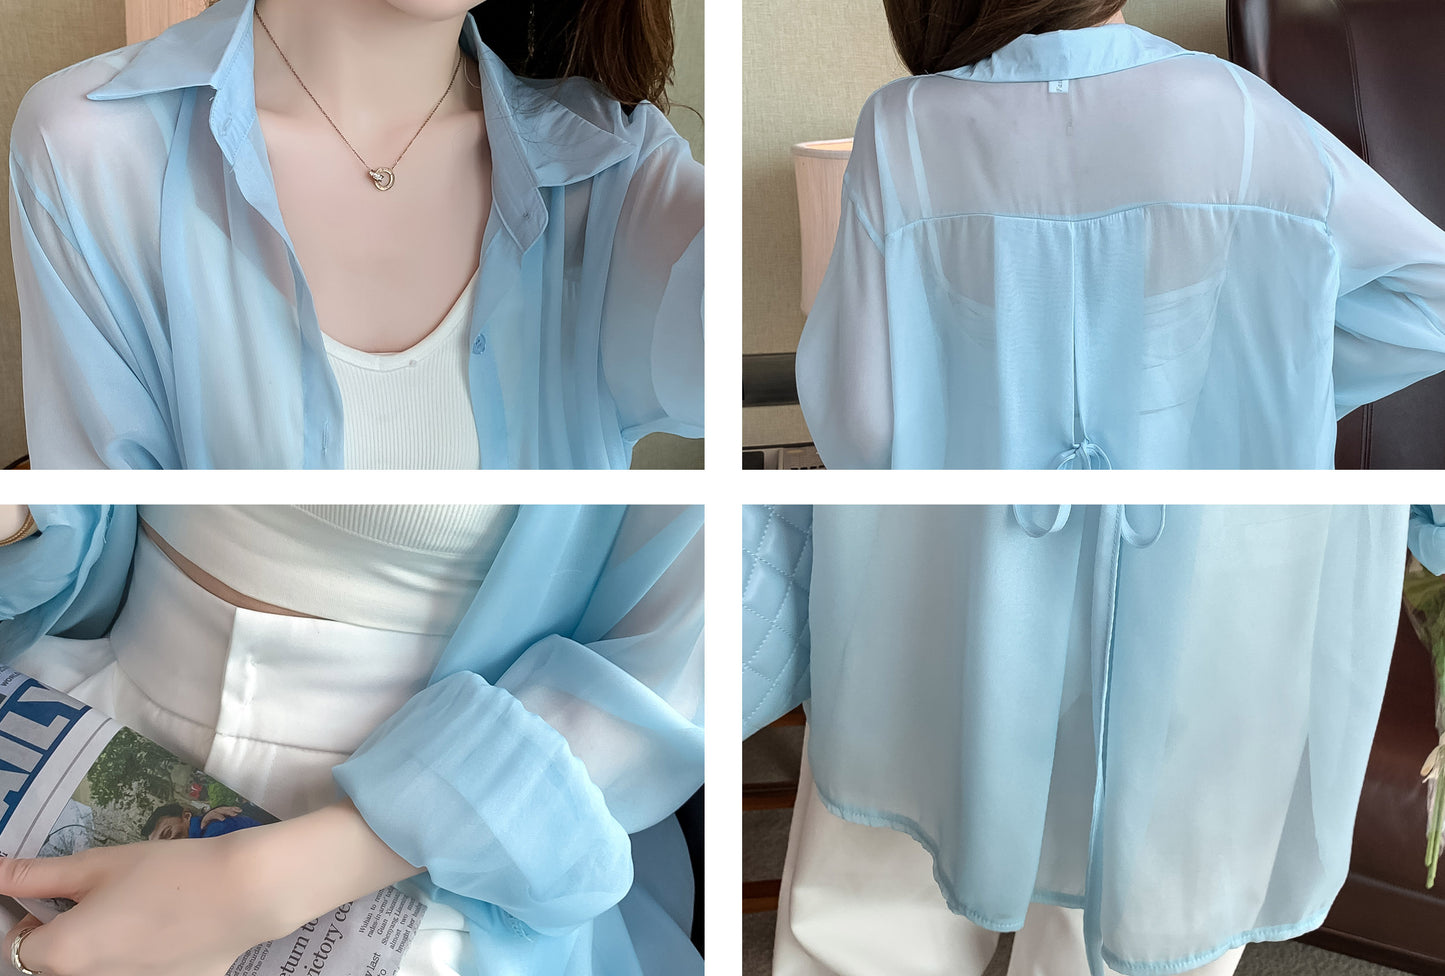 Collared neck Button Down Shirt Solid Long Sleeve Loose Blouse